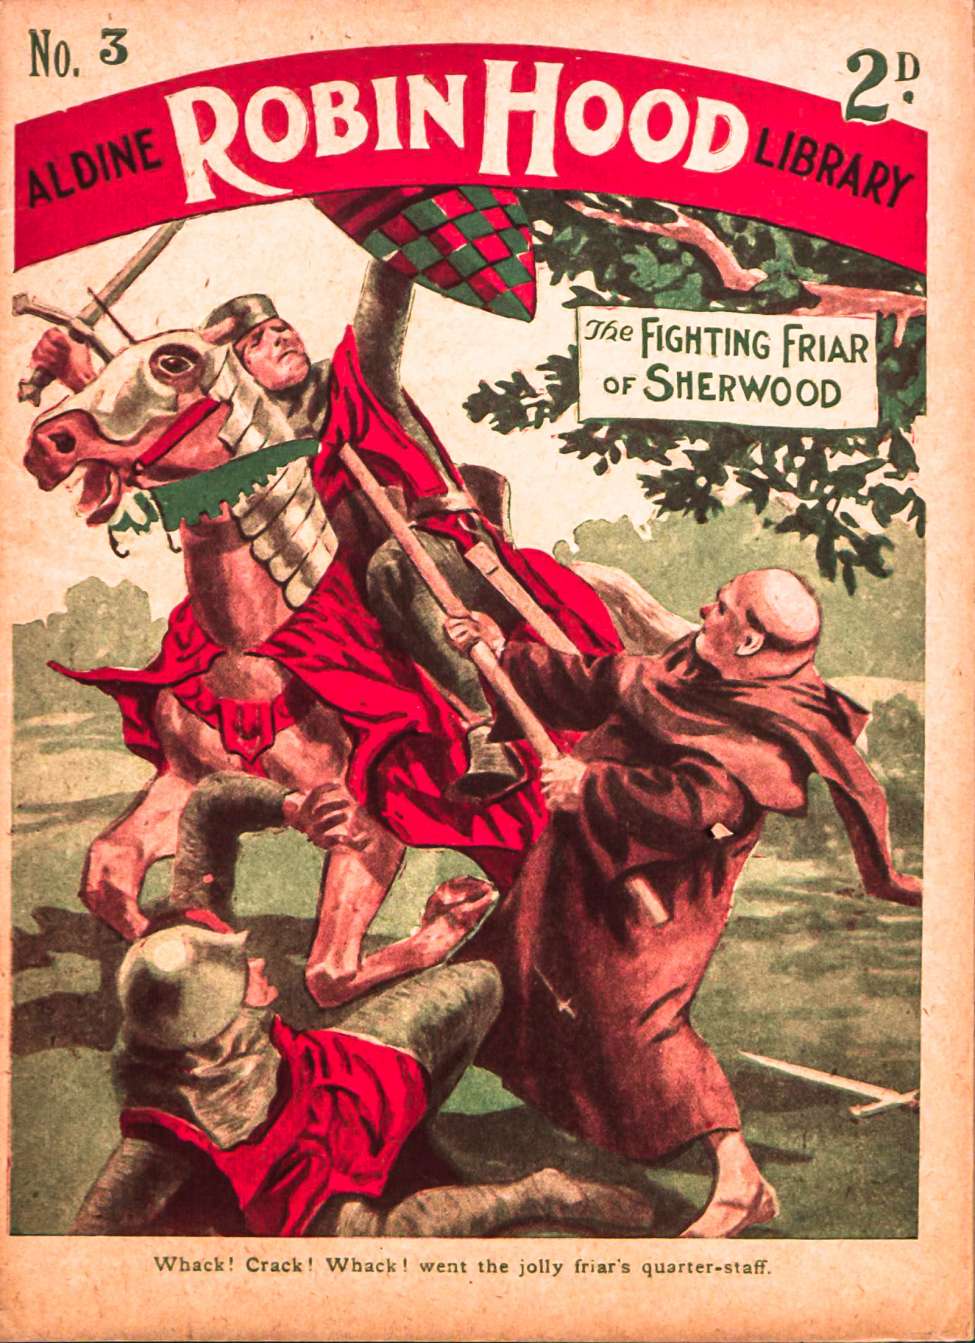 Book Cover For Aldine Robin Hood Library 3 - The Fighting Friar of Sherwood